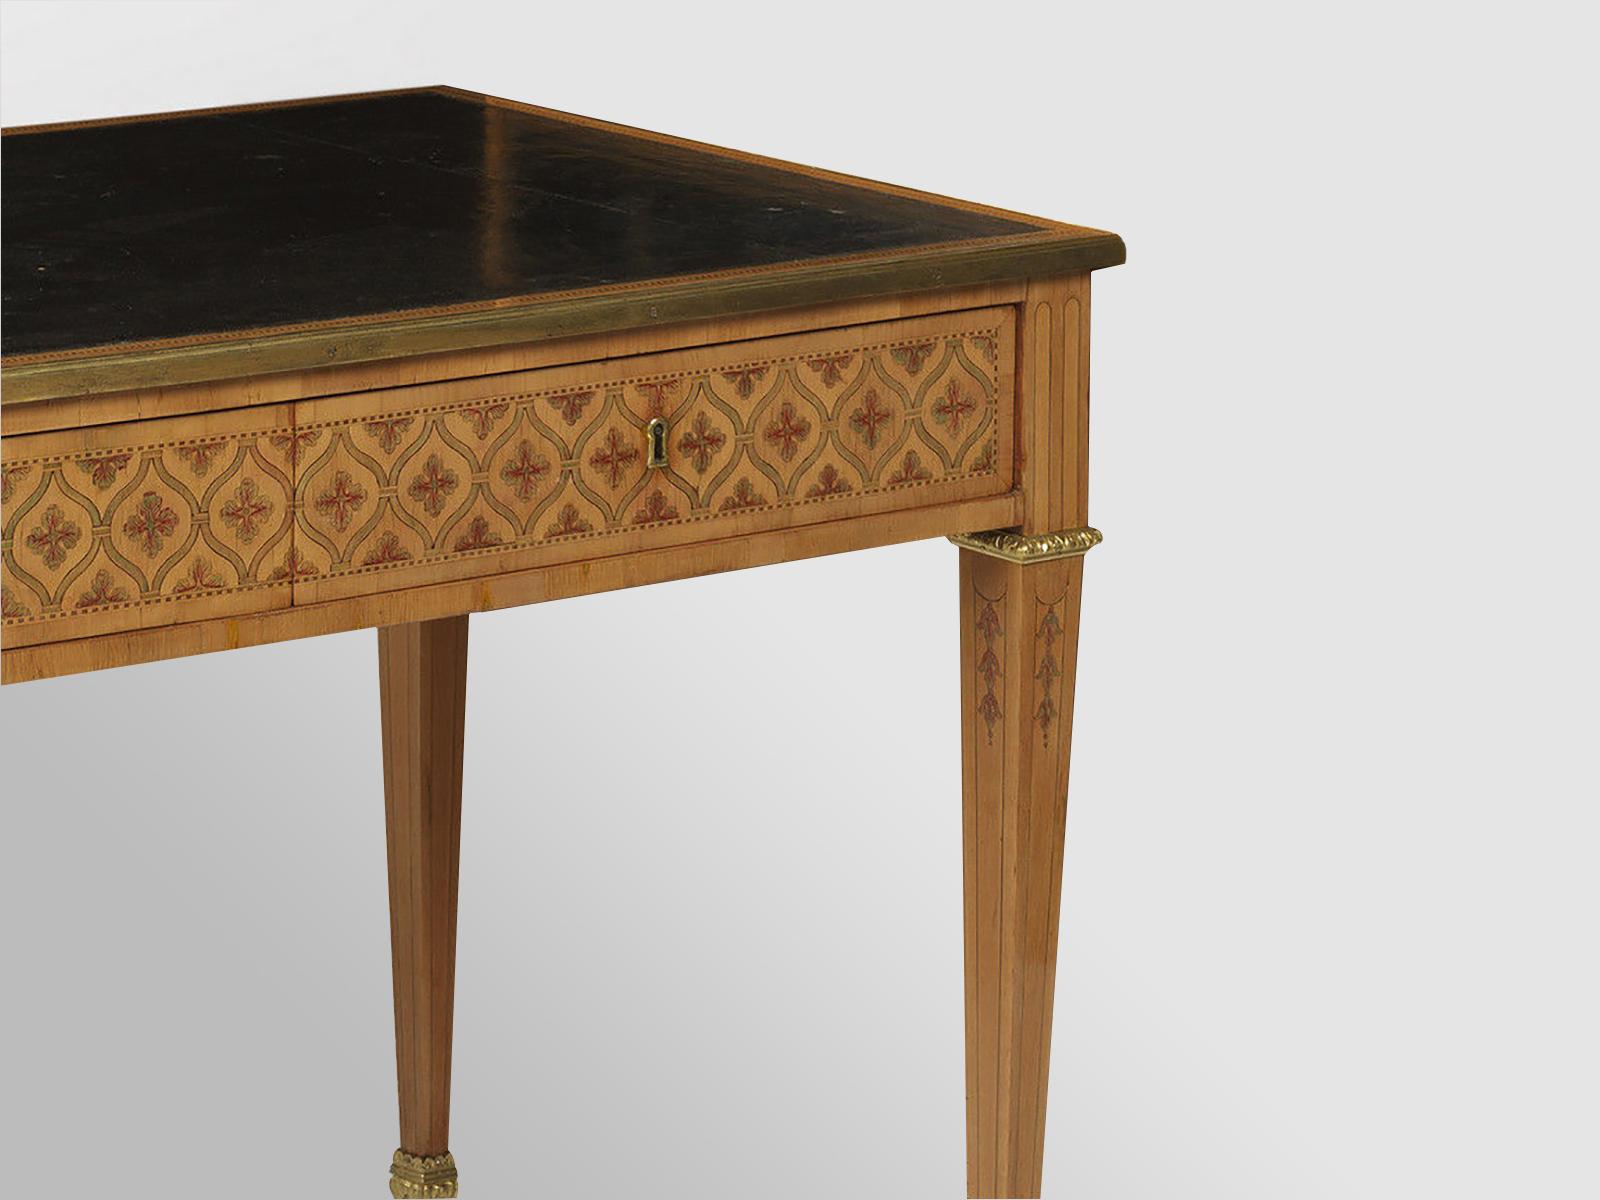 Louis XVI Ormolu-Mounted Marquetry Bureau Plat and Cartonnier In Good Condition For Sale In London, Middlesex